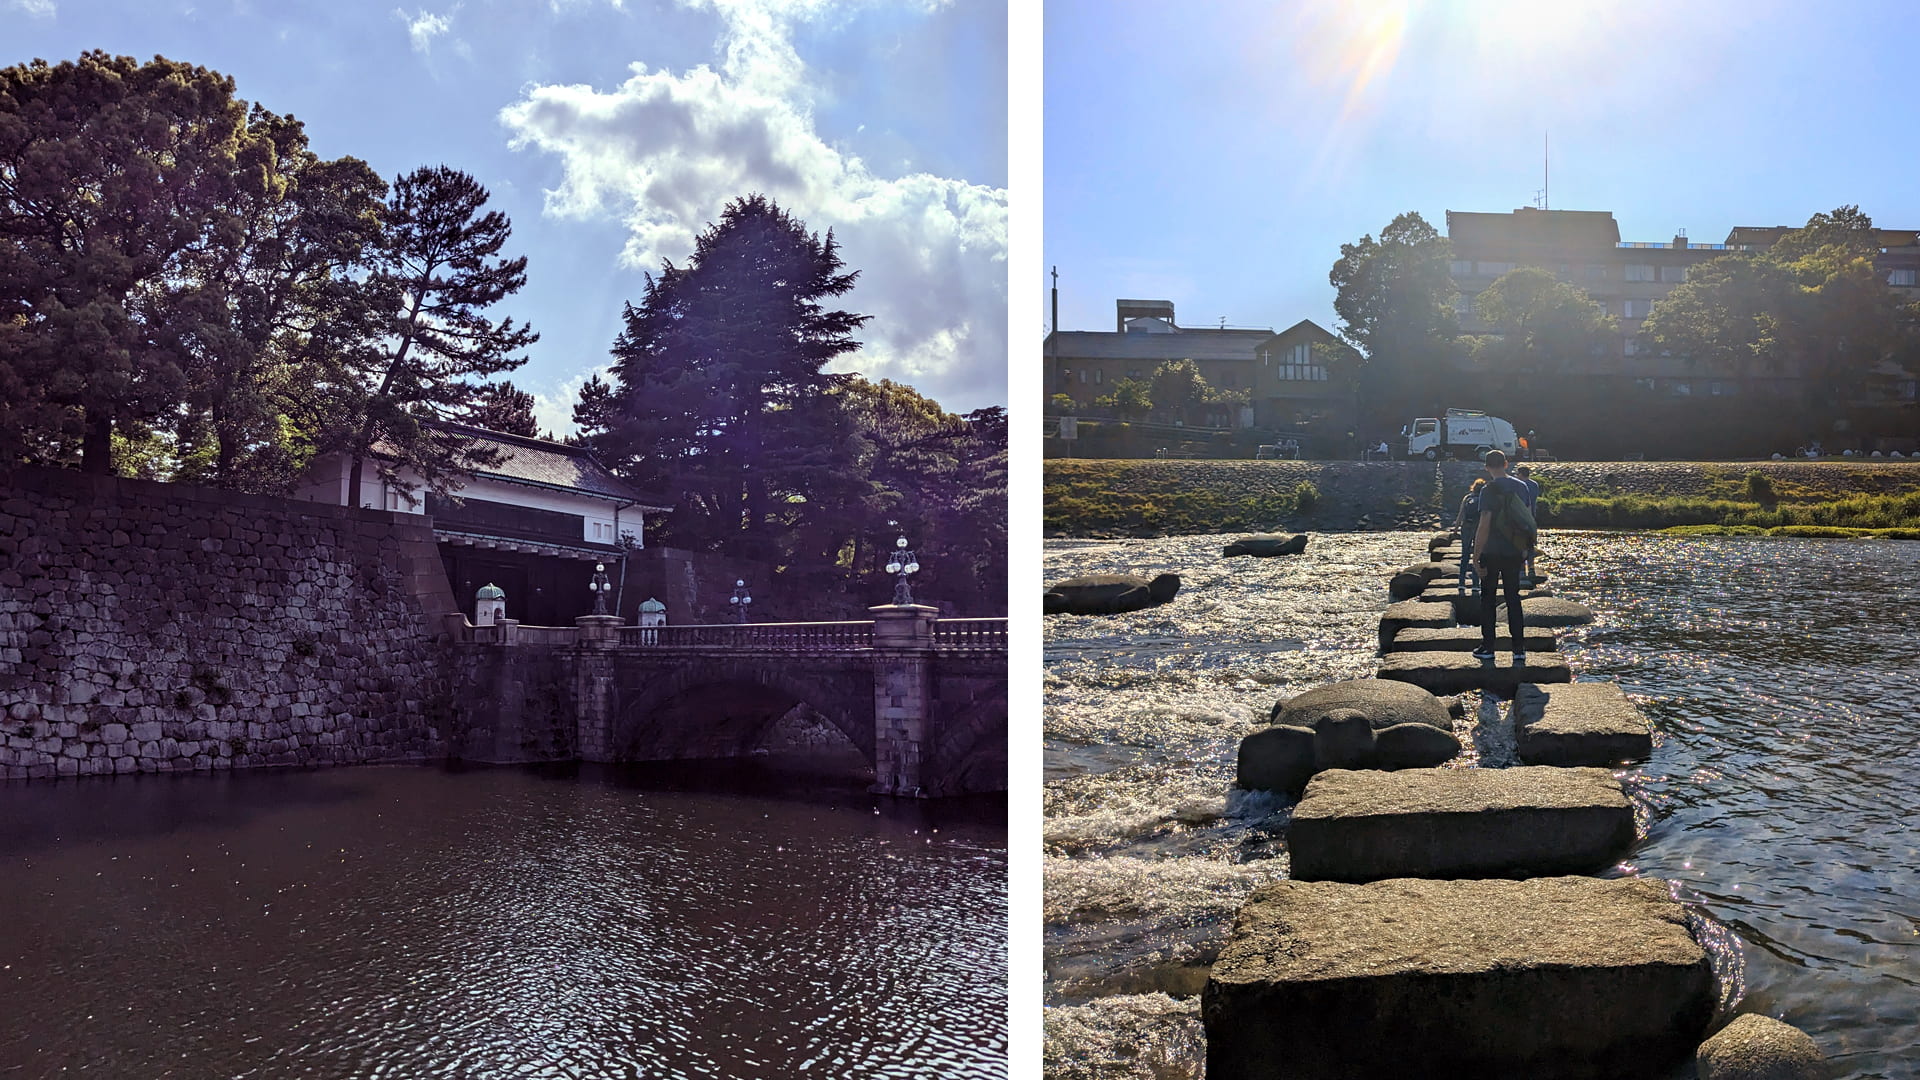 Kyoto waterways: View of a temple along the river (left), and the JWU crew walking across the river on stone pylons (right).